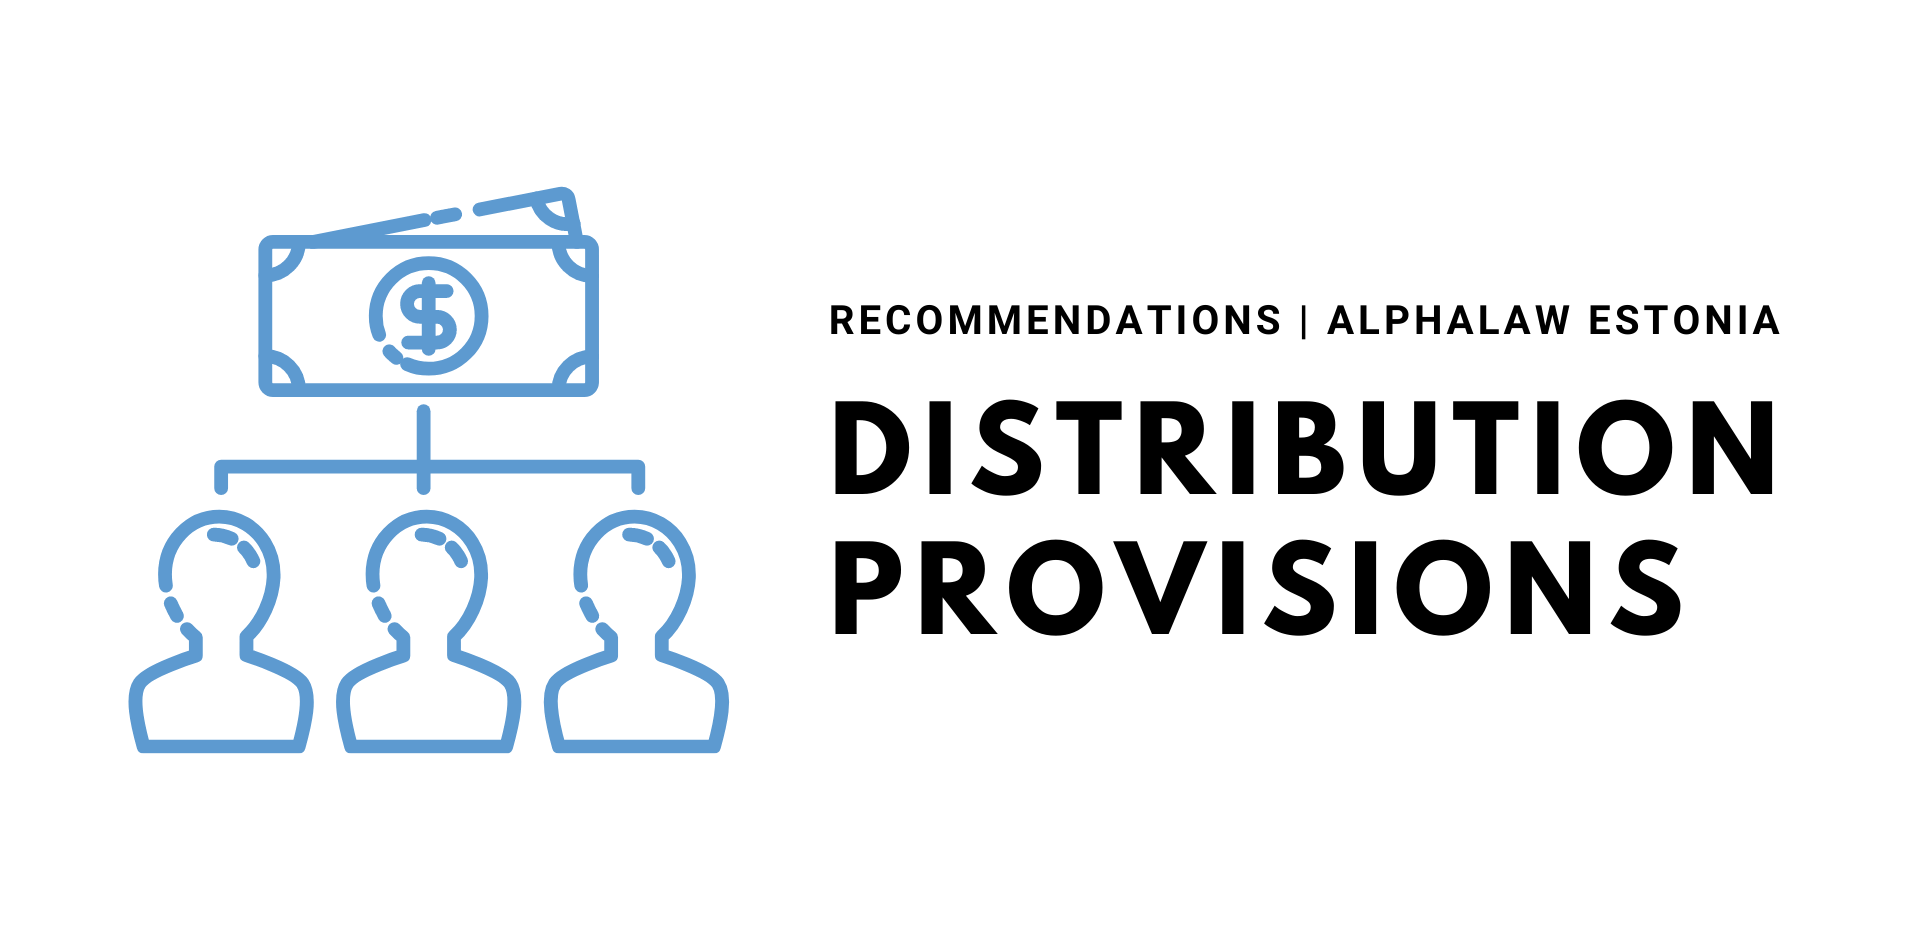 Provisions for Distributions From a Fund